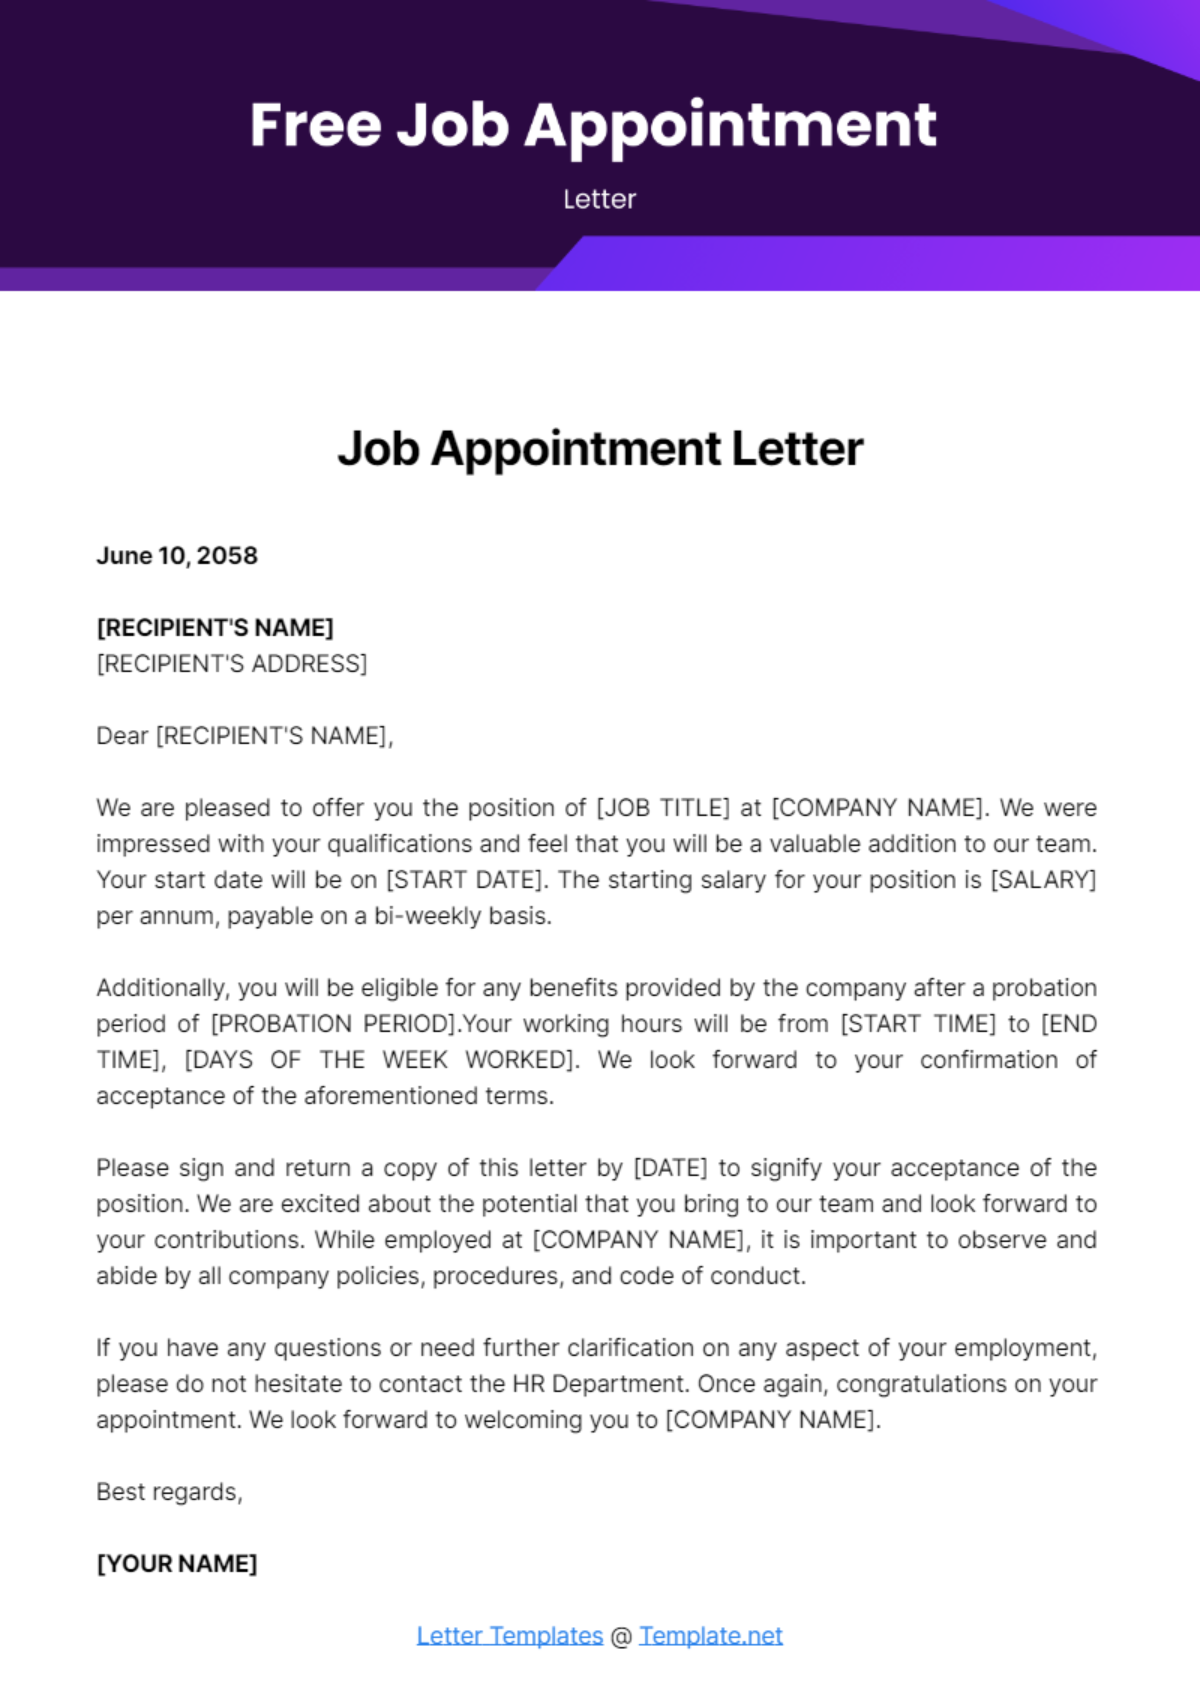 Job Appointment Letter Template